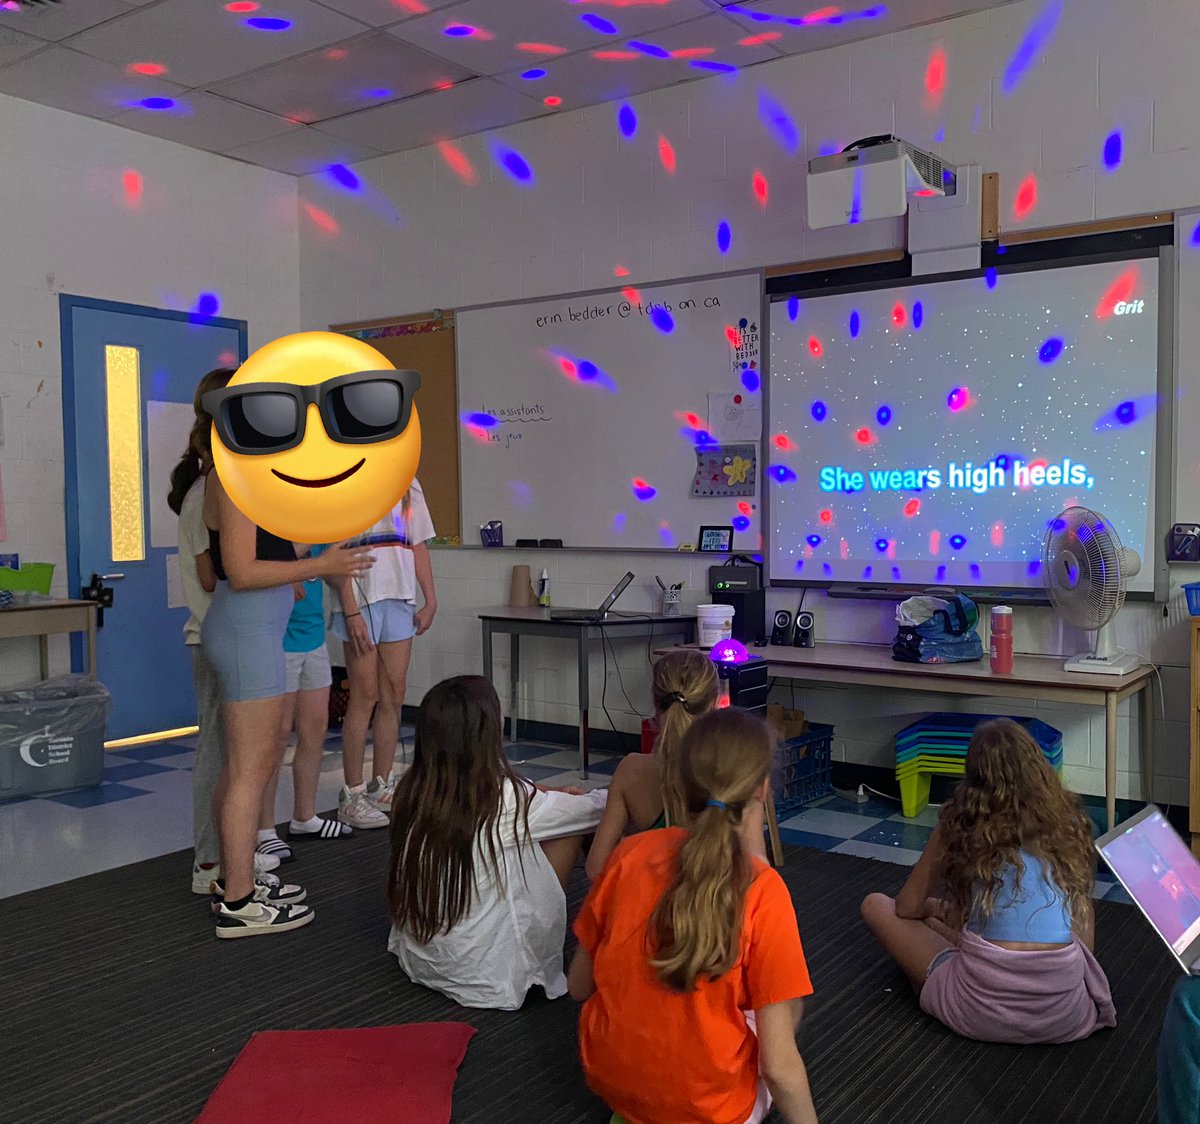 Having fun during the last week of school! Thanks V for bringing in a karaoke machine for us to use 🎶 🎤 @taylorswift13 you’re the class favourite right now!